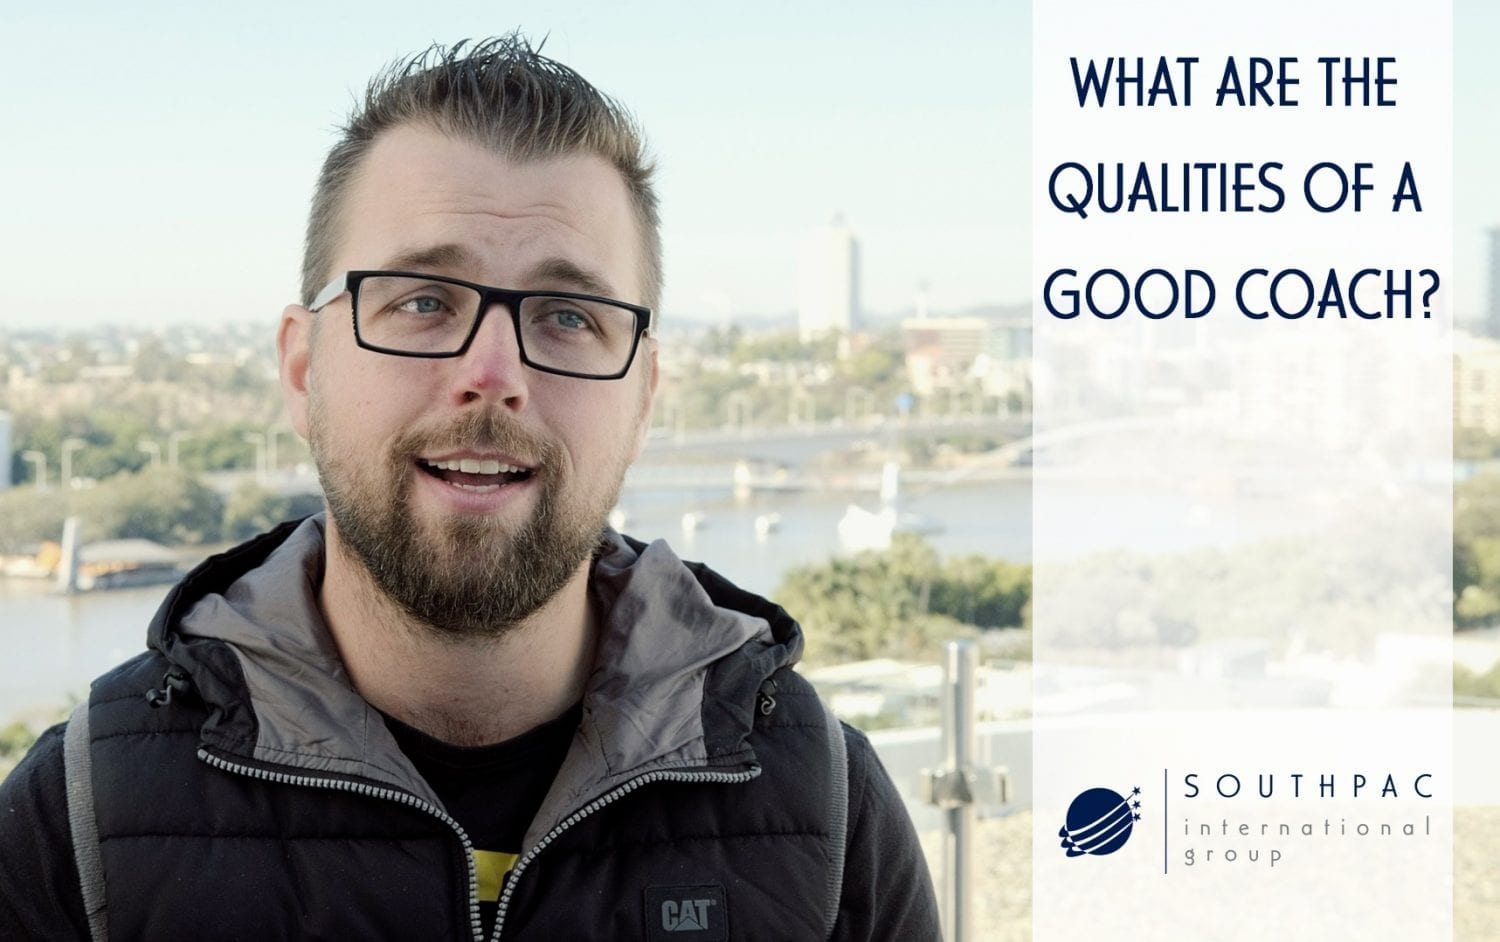 HOPLAB Collaborator Andrew Barrett explains 'What are the qualities of a good coach?'